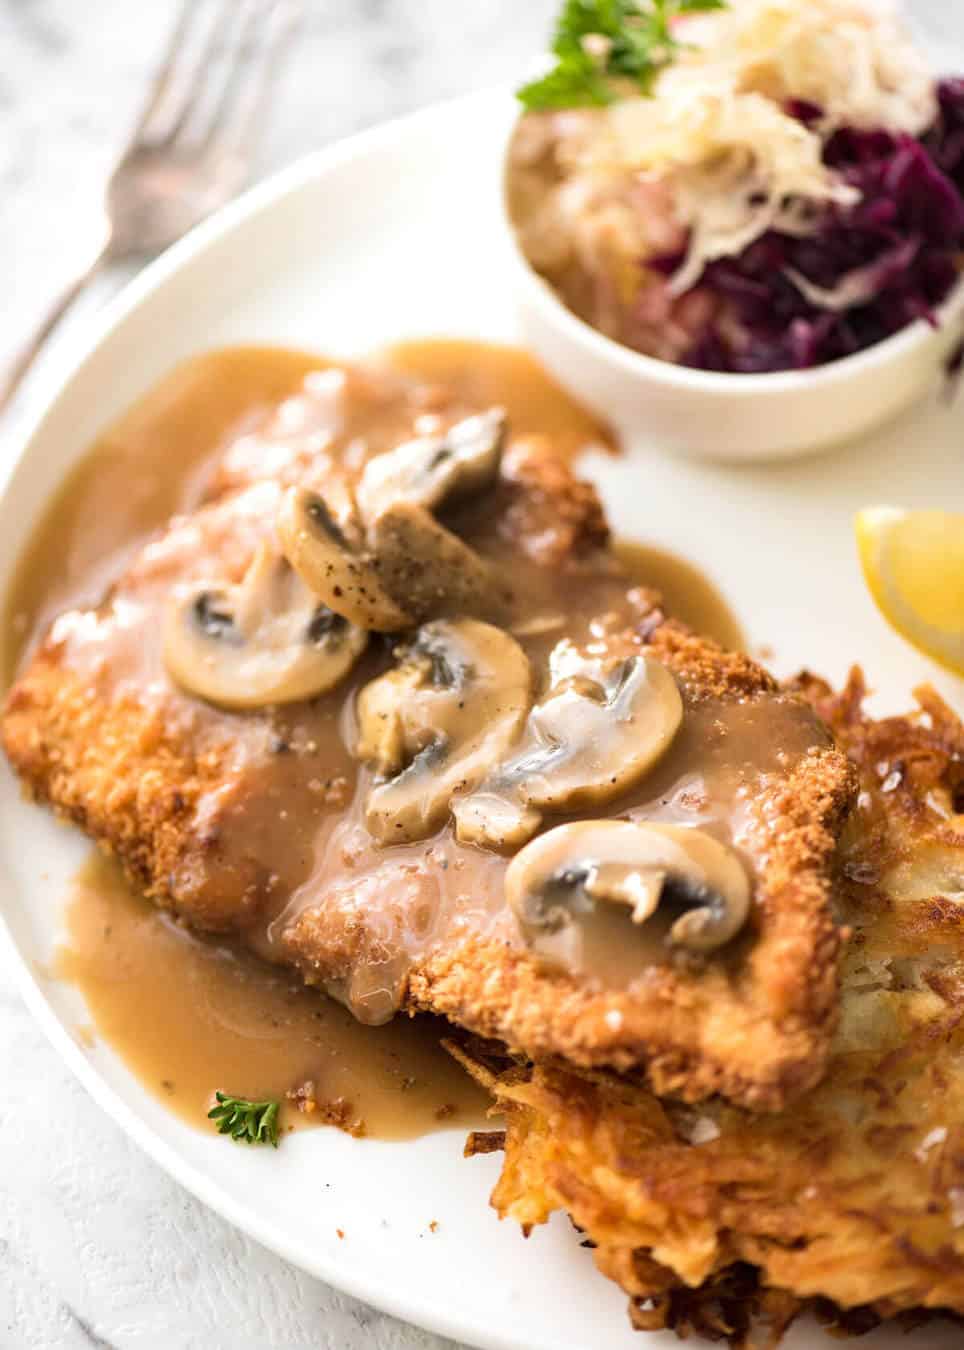 There is nothing quite like a freshly made schnitzel. Extra crunchy and golden, make this with pork, chicken, veal or turkey. www.recipetineats.com